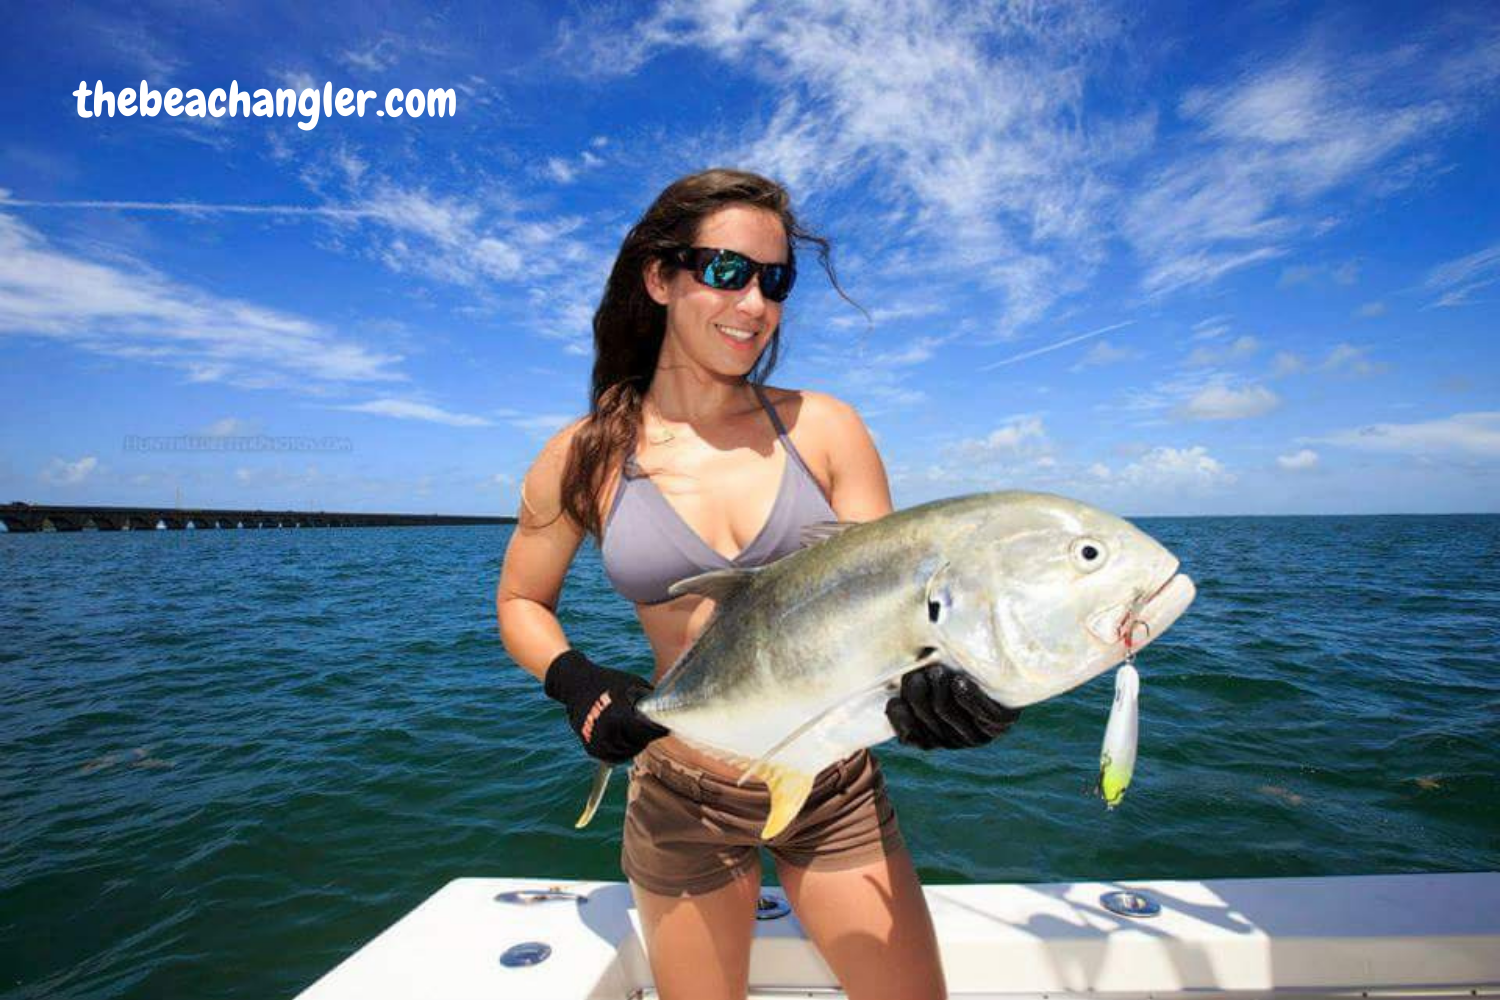 Lady with a large Jack Crevalle caught off the beach